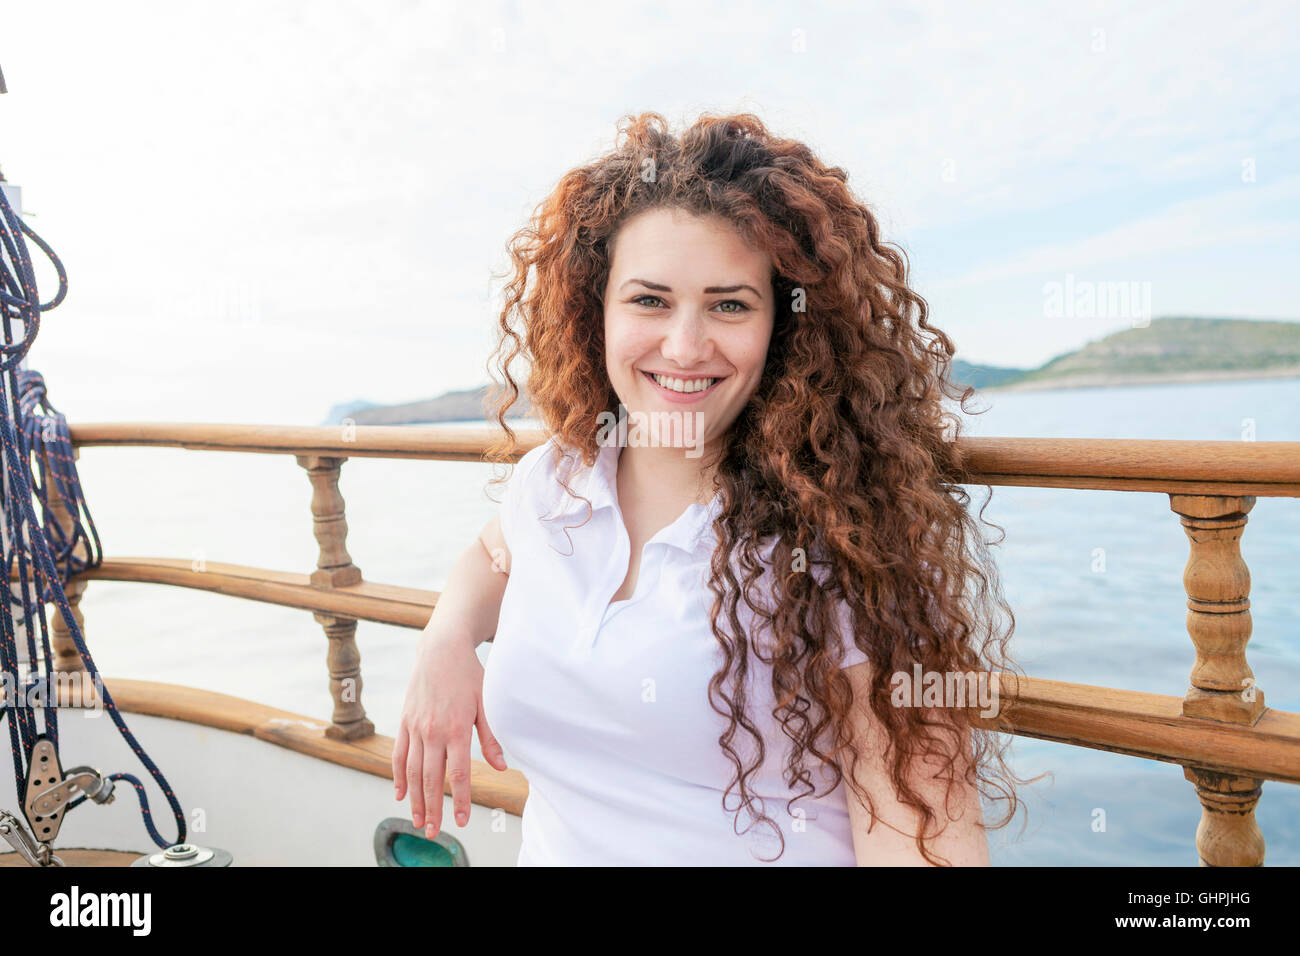 Portrait of beautiful woman with curly hair on sailboat Stock Photo